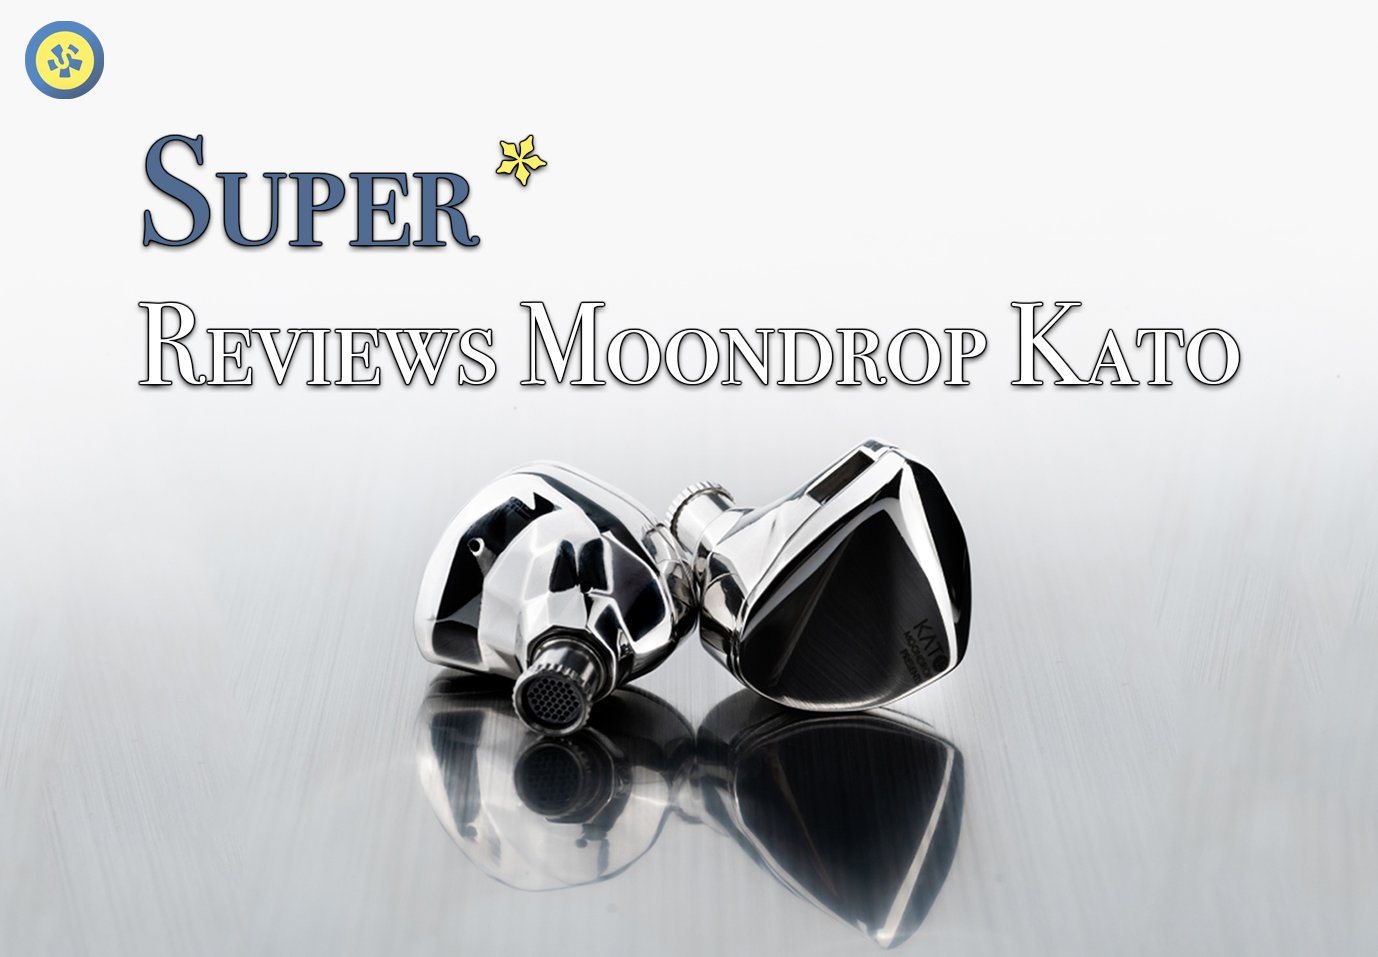 Super* Reviews The Moondrop Kato: The Best Single Dynamic Earphone From Moondrop